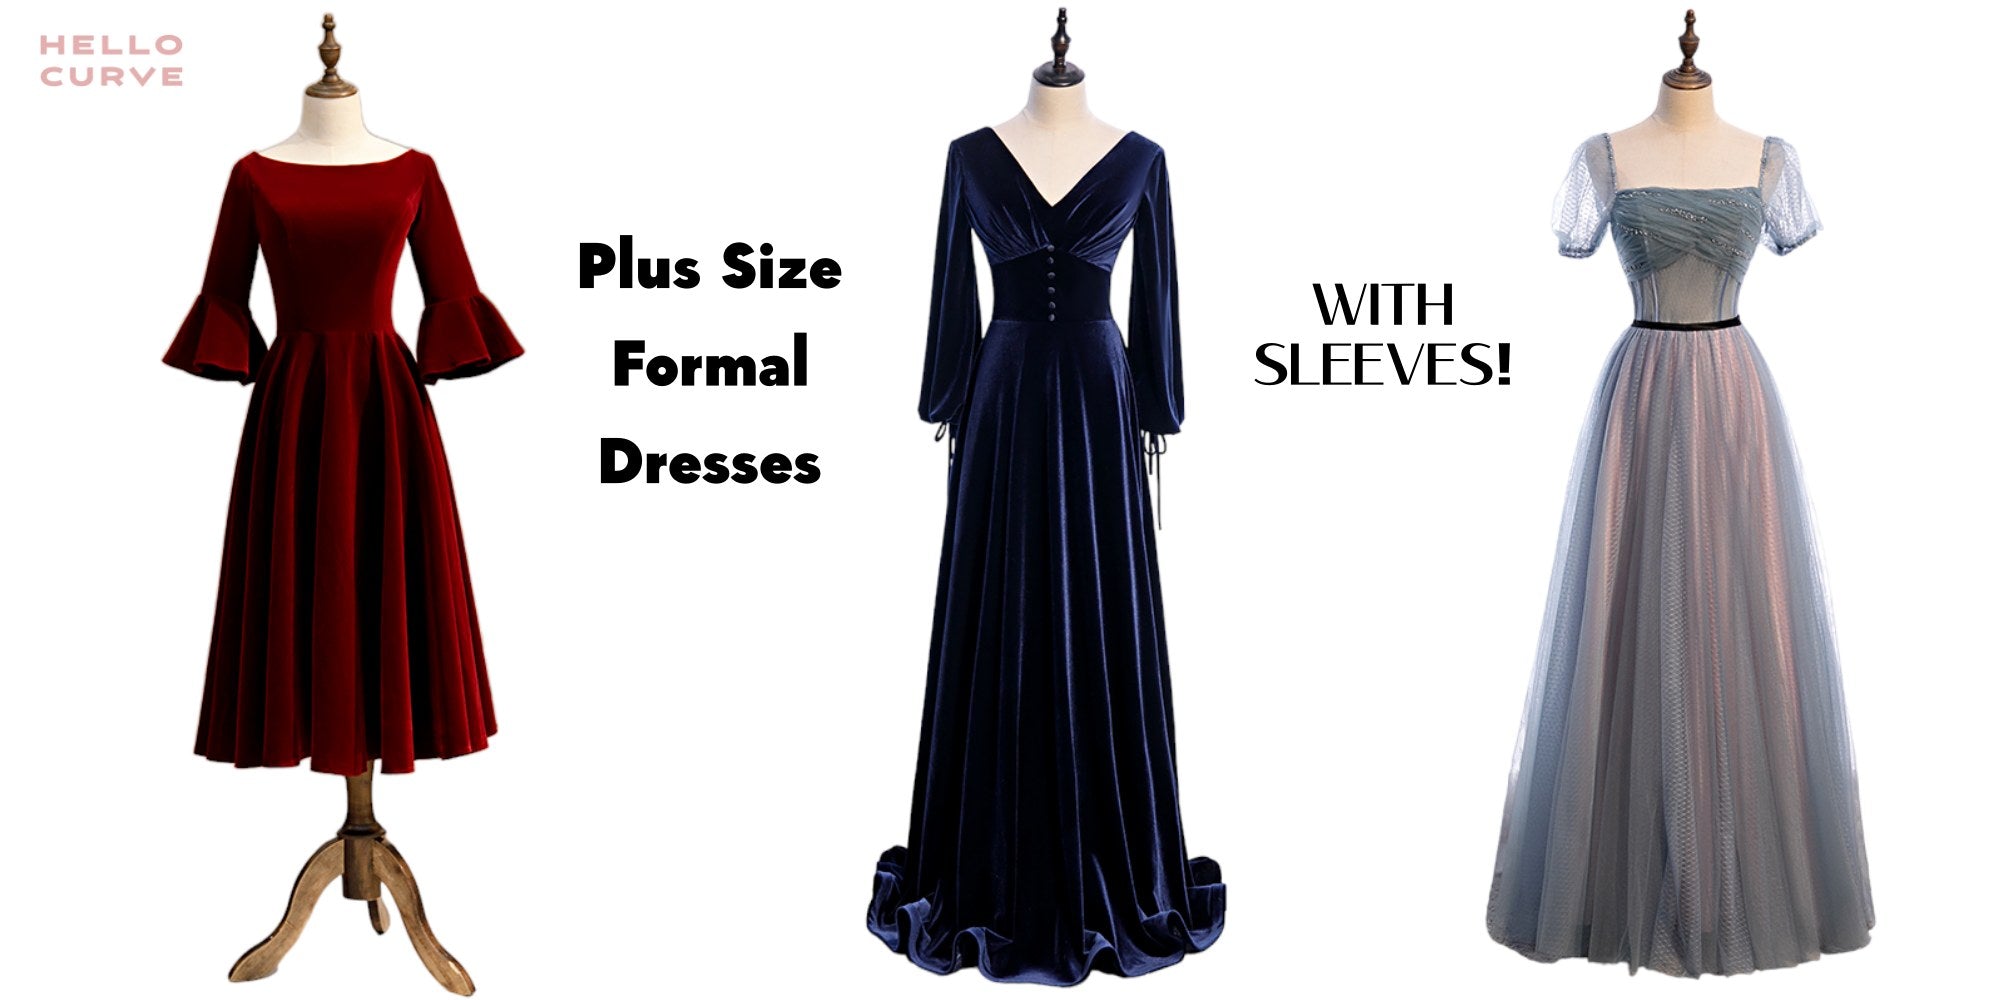 Curvy and Confident: Embracing Elegance with Plus Size Formal Dresses Featuring Sleeves